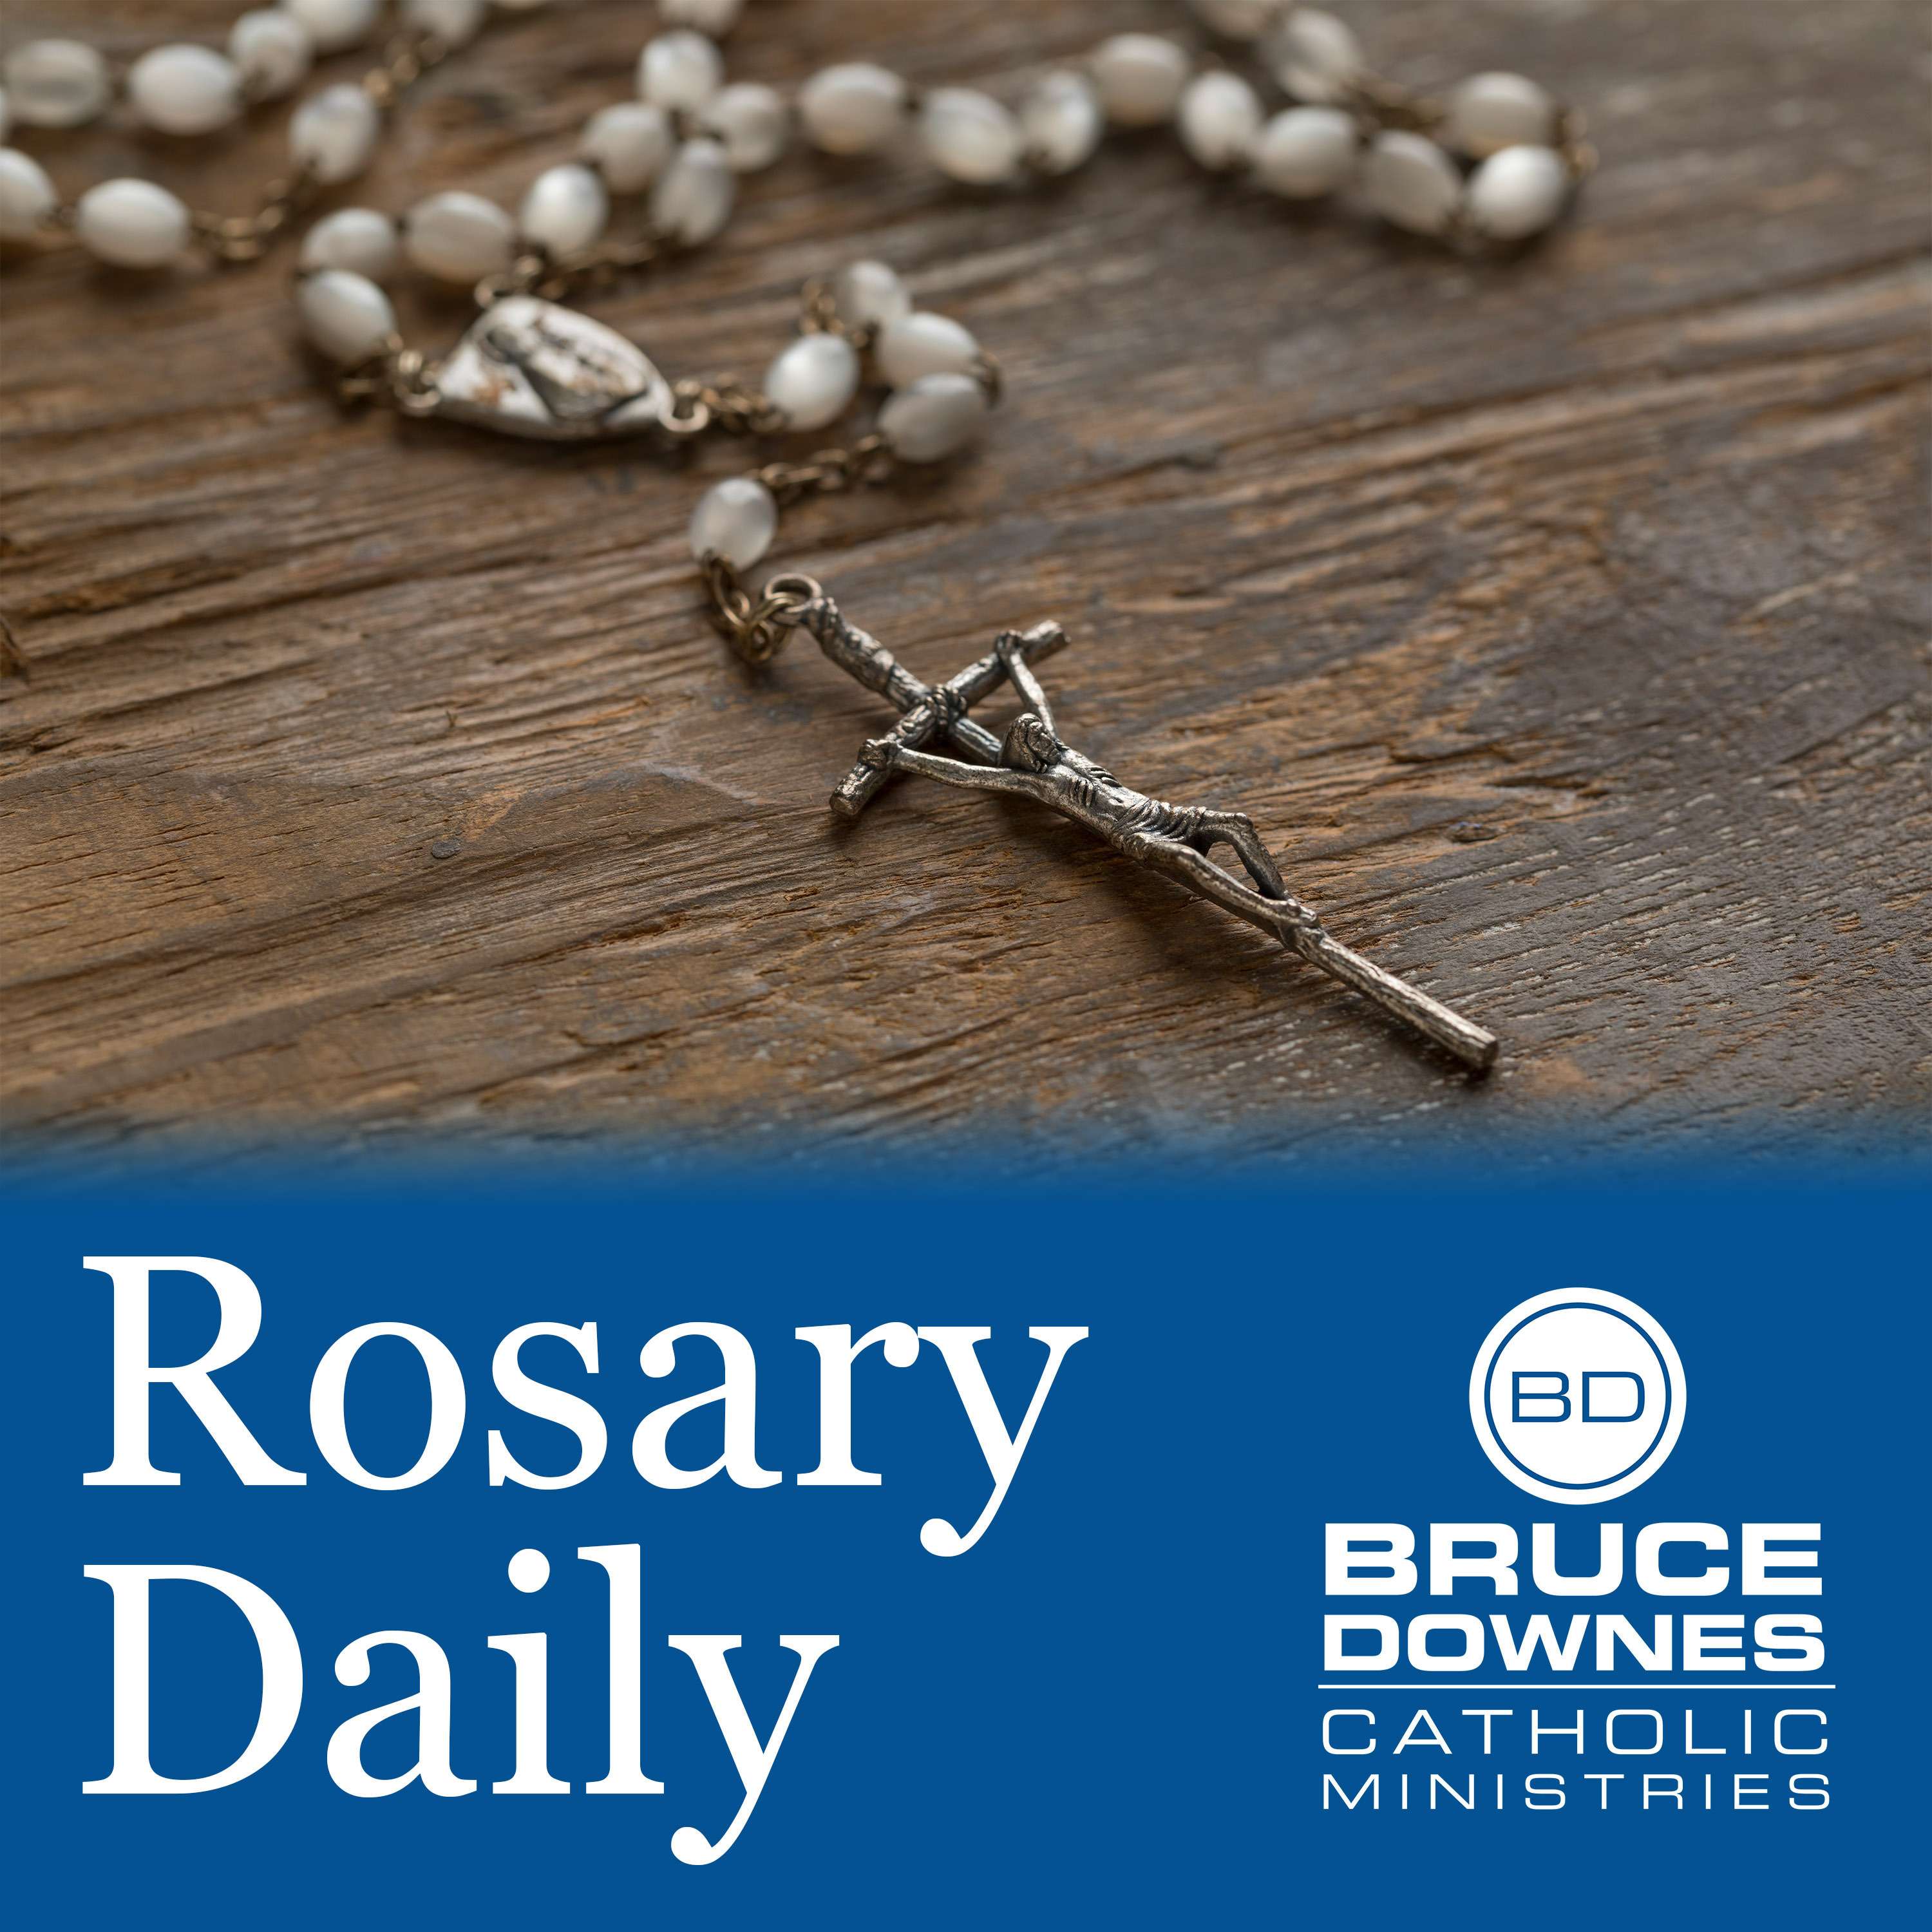 Rosary Daily with Bruce Downes Catholic Ministries